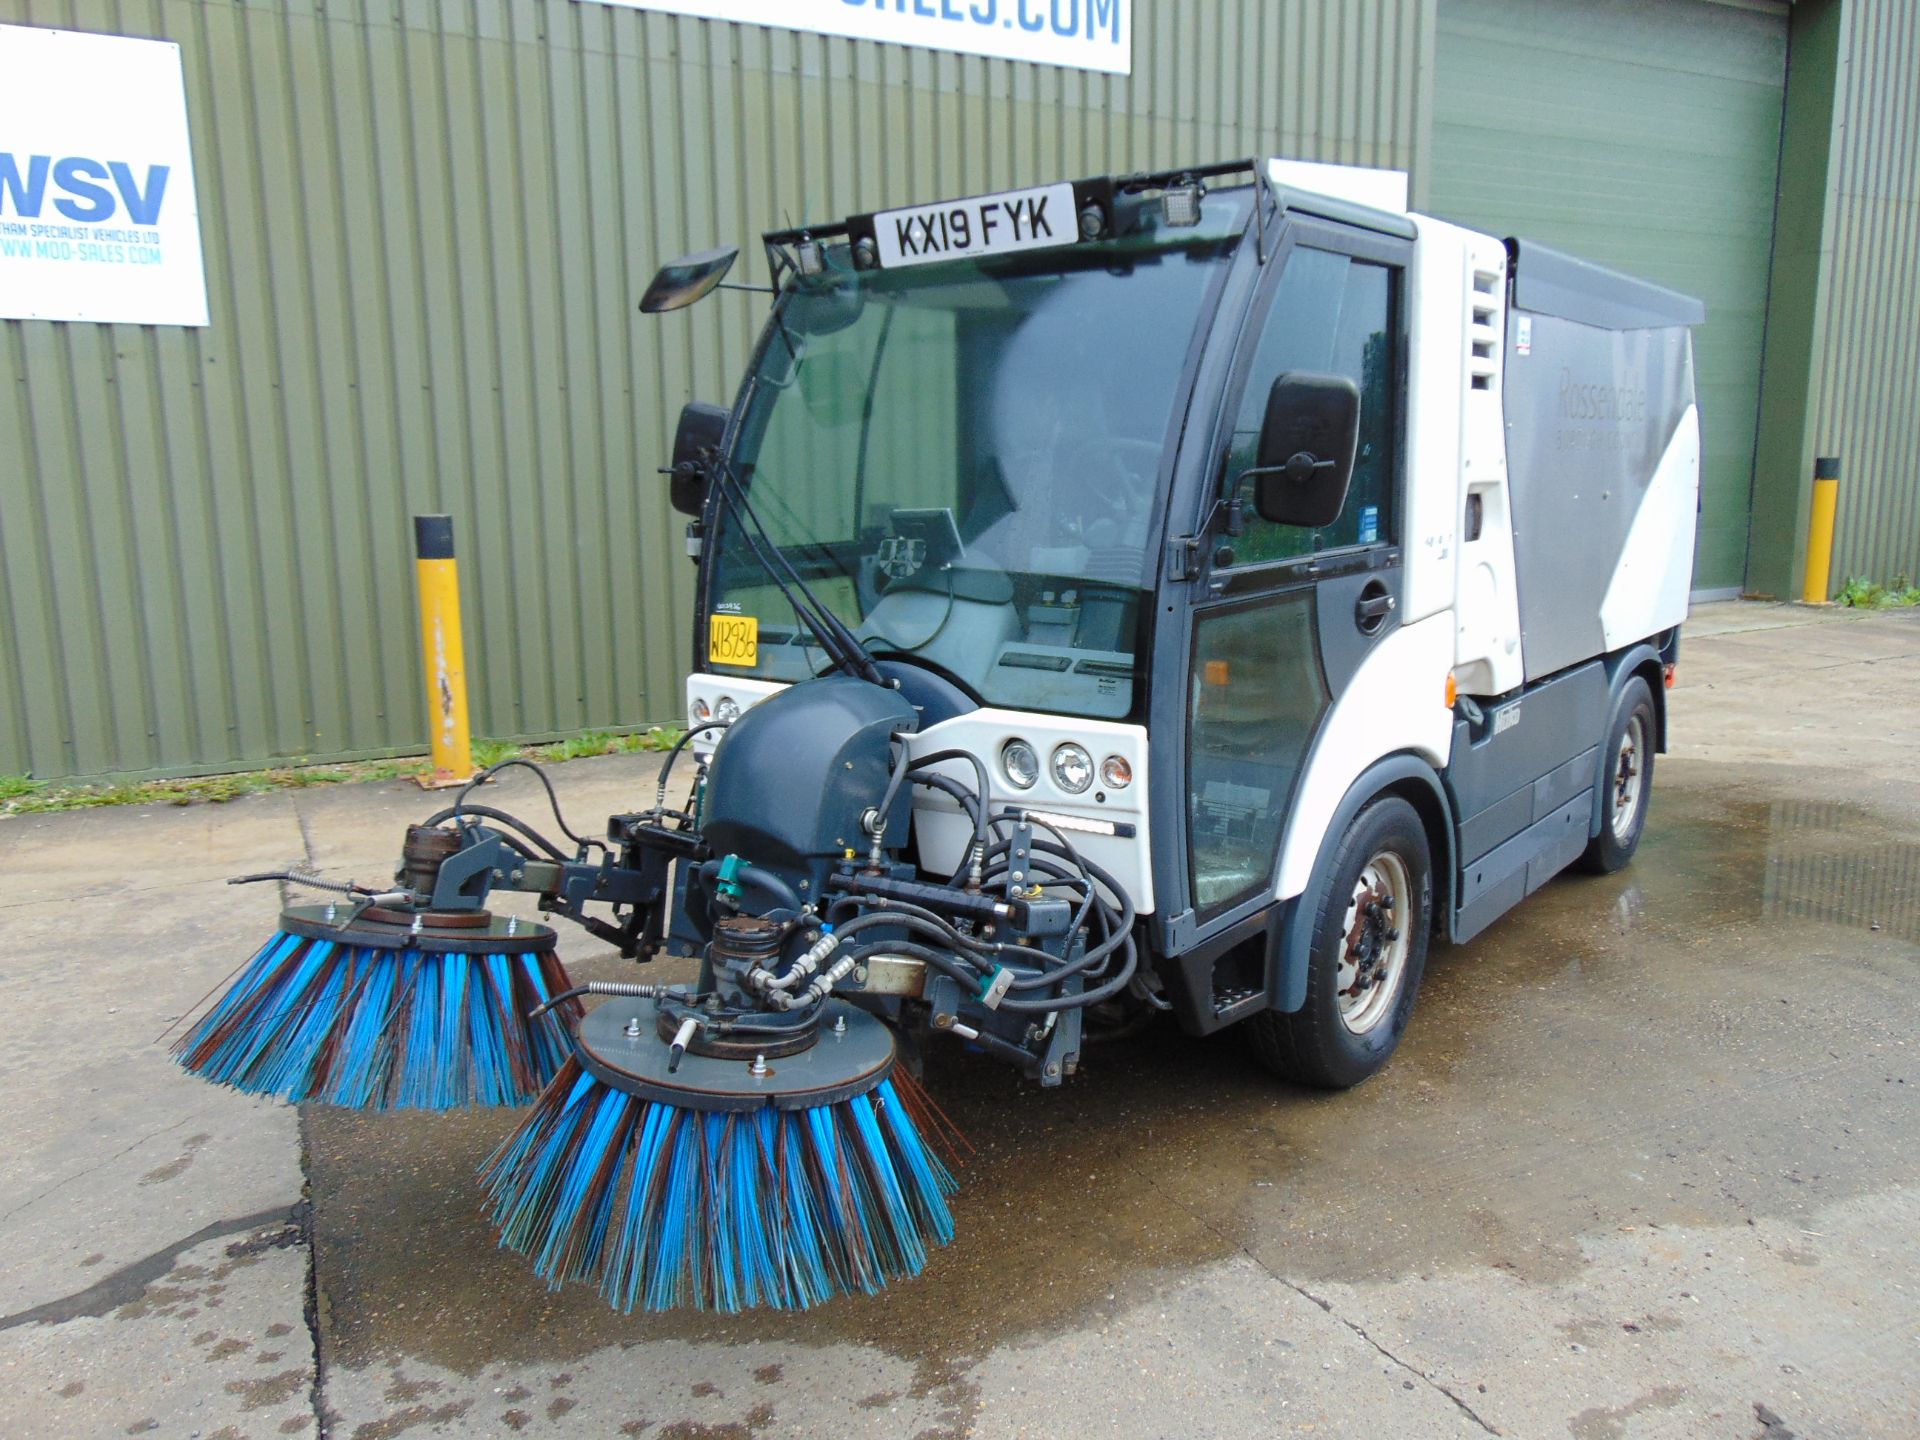 2019 Hako Citymaster 2200 Compact Road Sweeper ONLY 18,784 Miles - Image 2 of 23